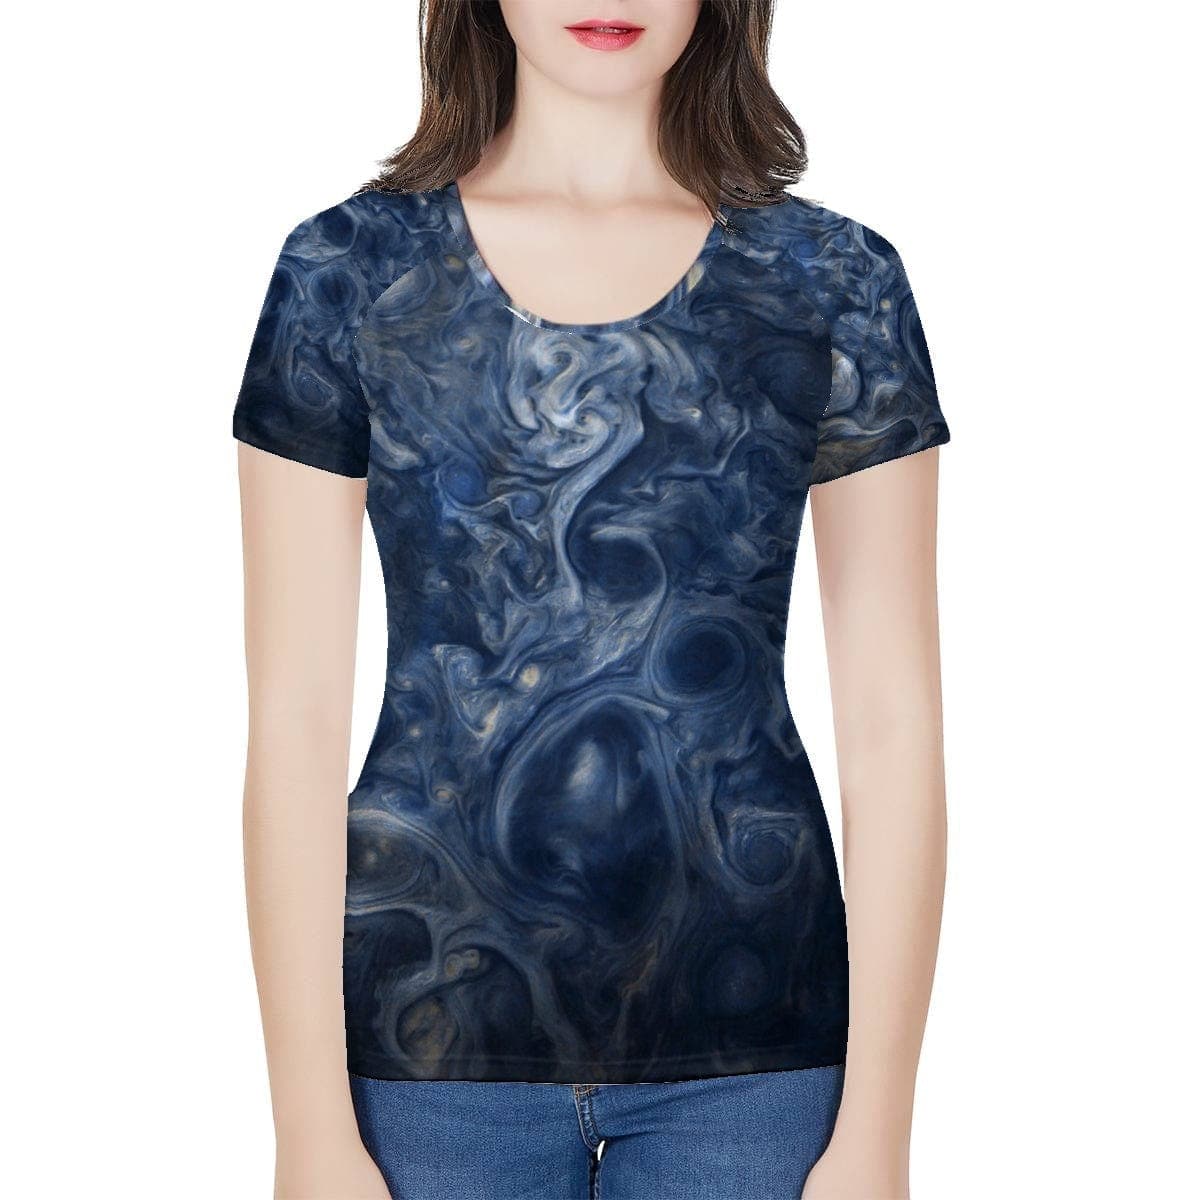 Jupiters southpole, Women's All Over Print Imitation QMilch T-shirt